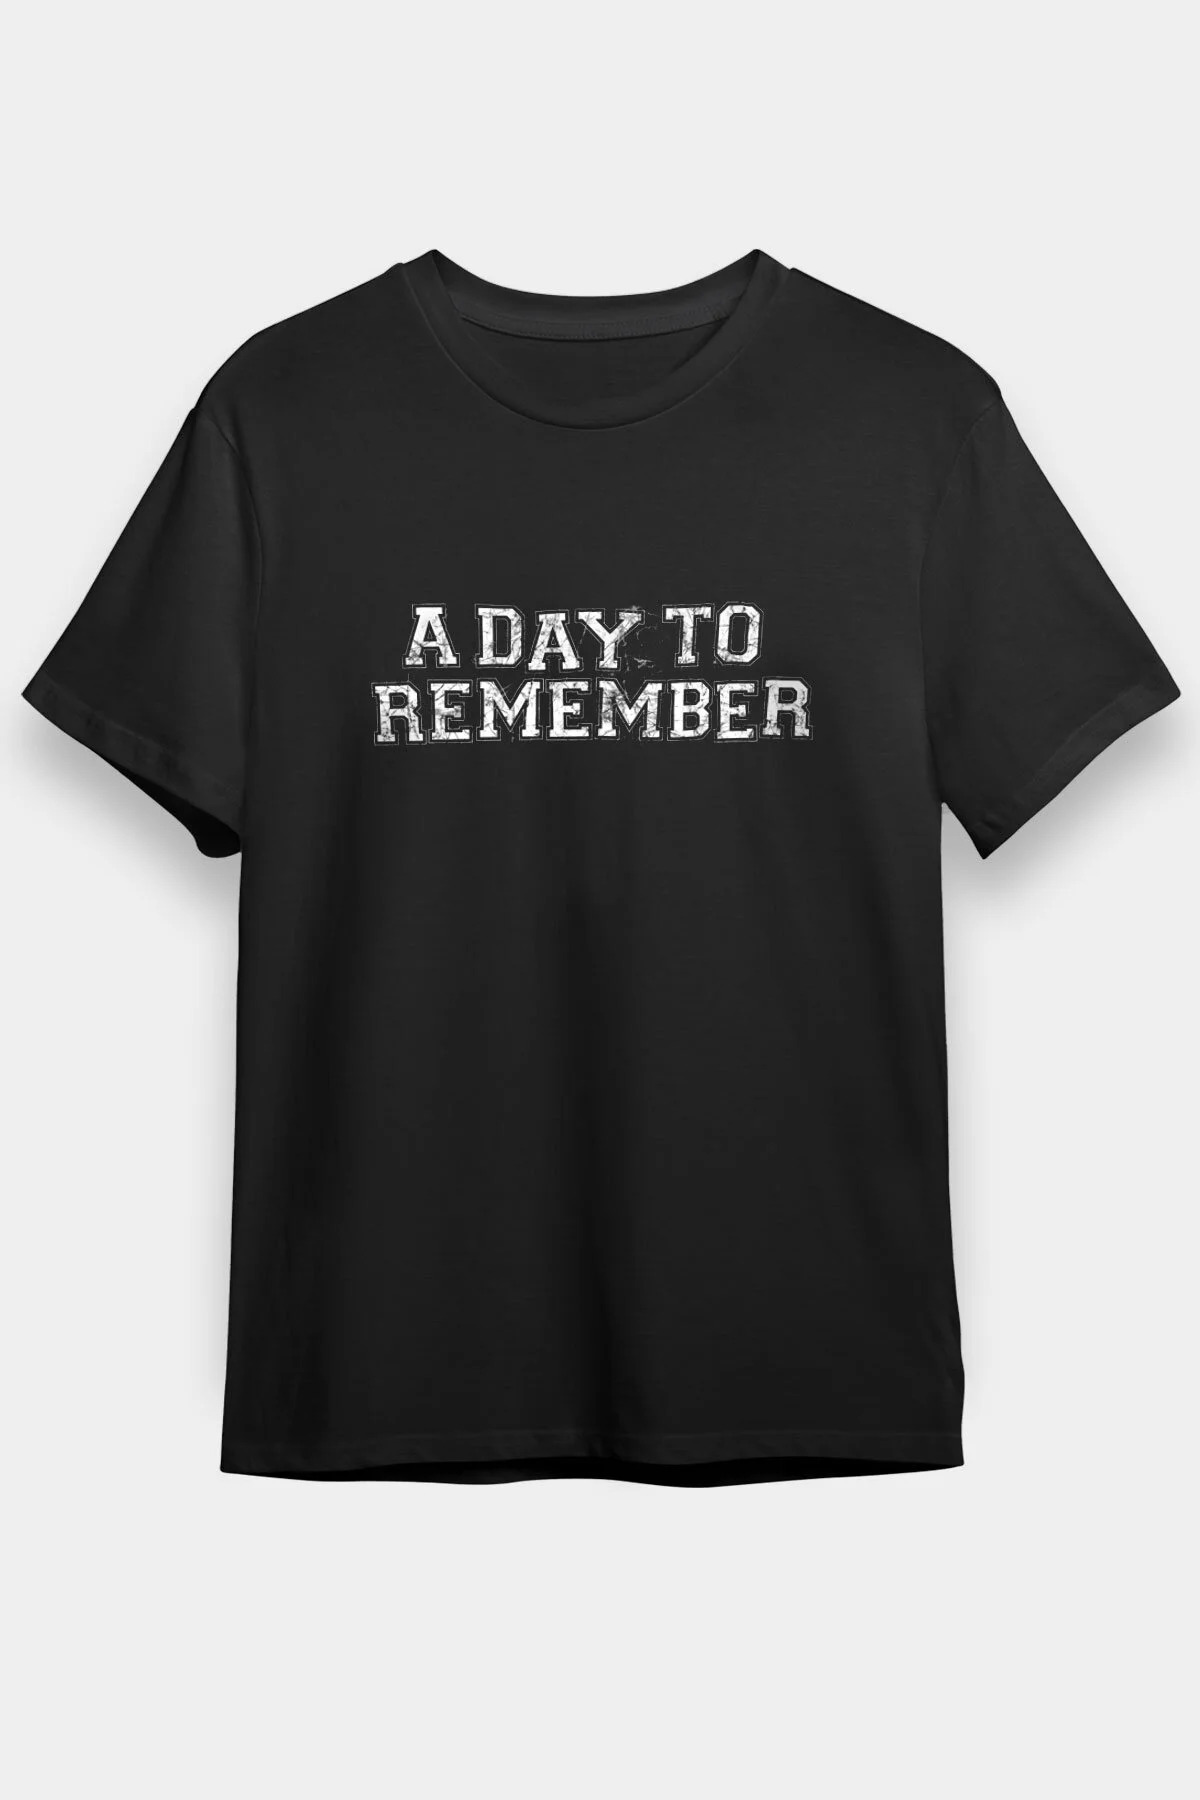 A Day To Remember Music Band ,Unisex Tshirt  23